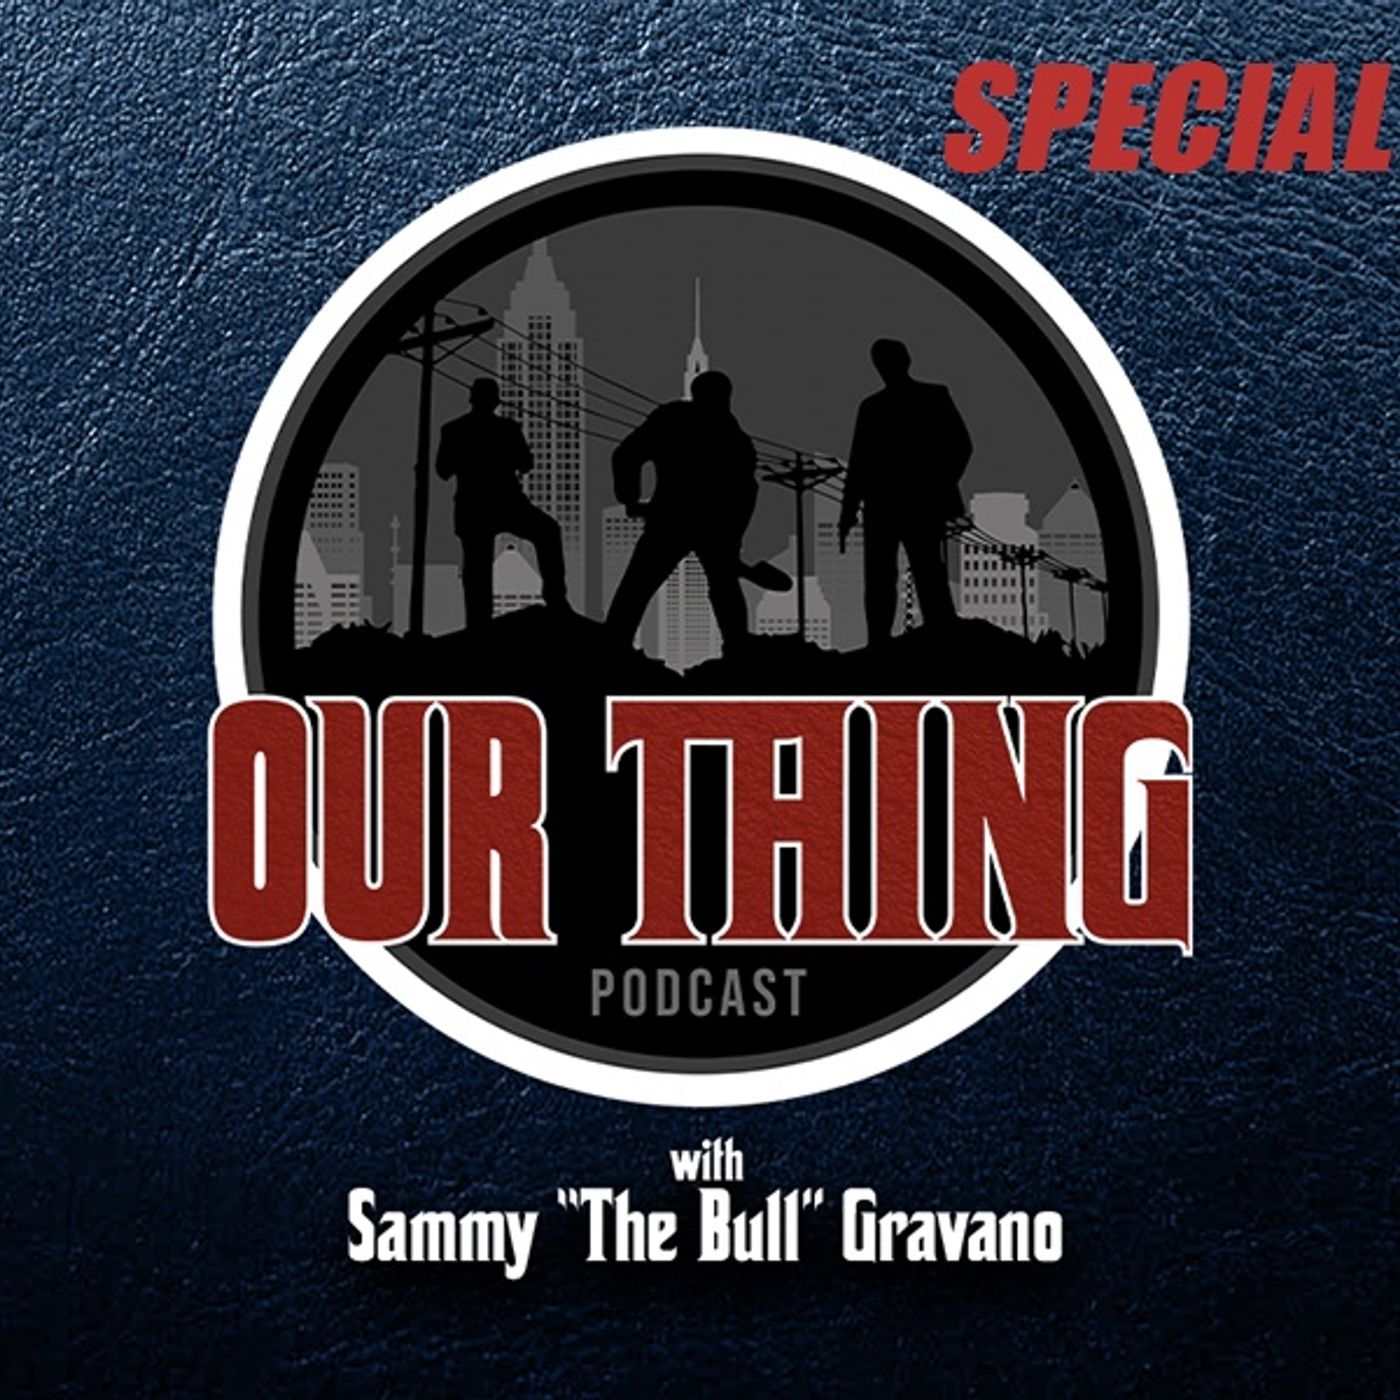 OURTHING SPECIAL EDITION with Sammy "The Bull" Gravano and former CIA